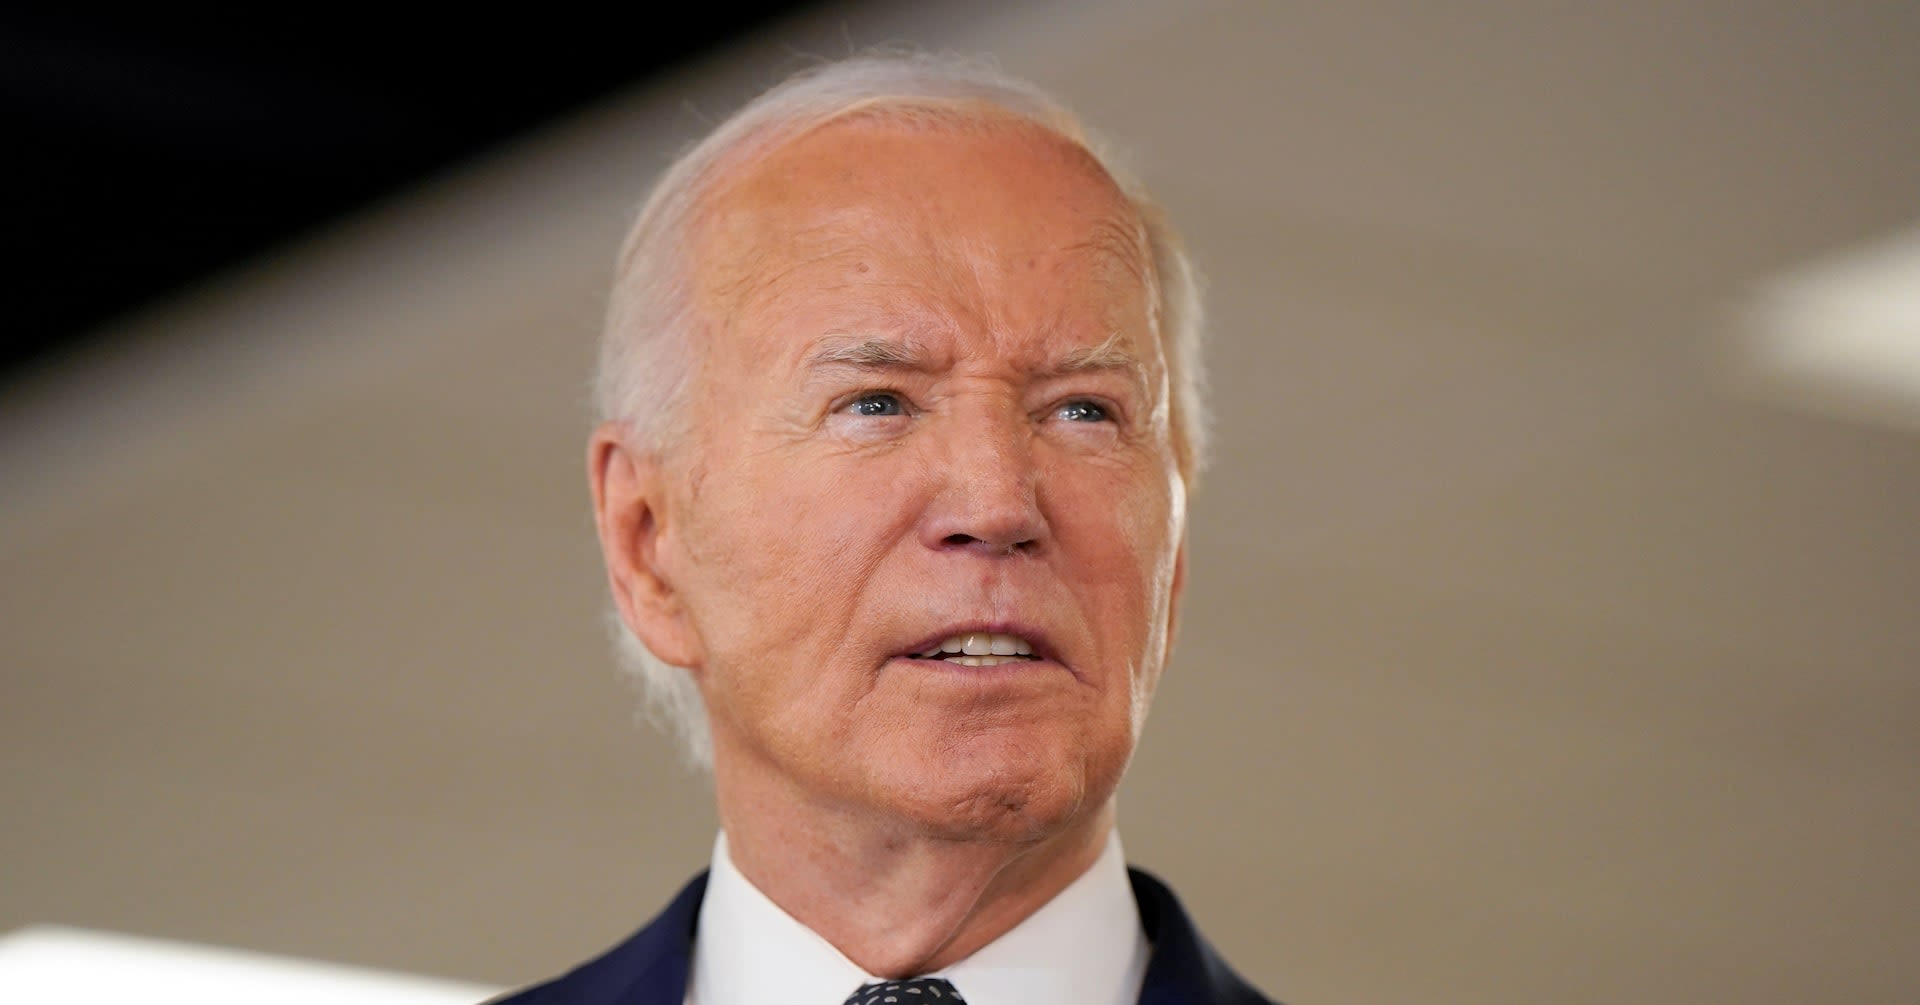 Struggling Biden faces big test with ABC interview, vows to fight on